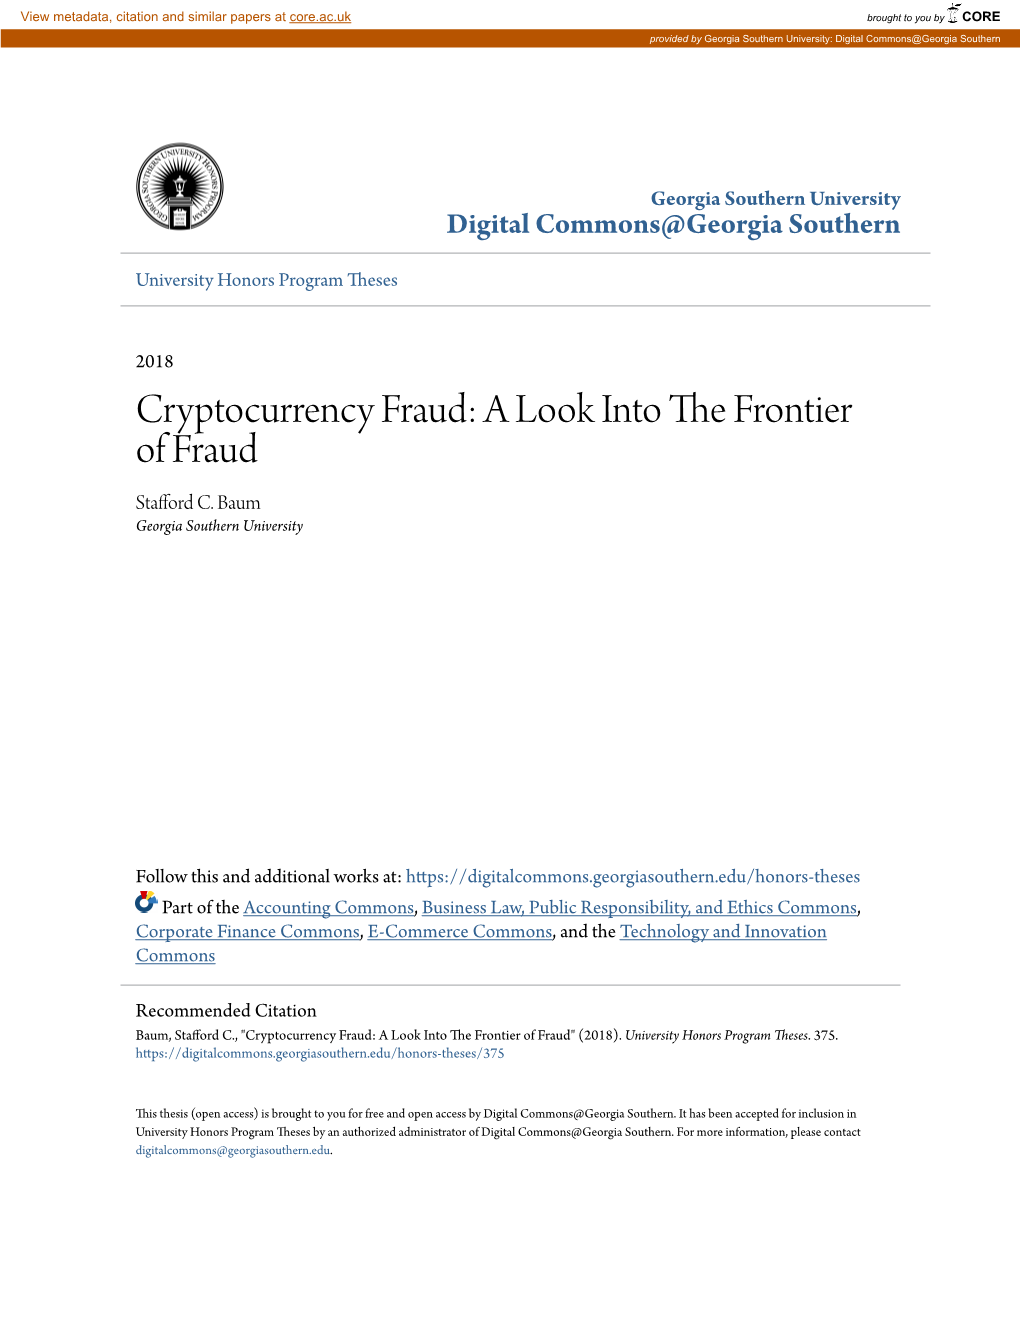 Cryptocurrency Fraud: a Look Into the Frontier of Fraud